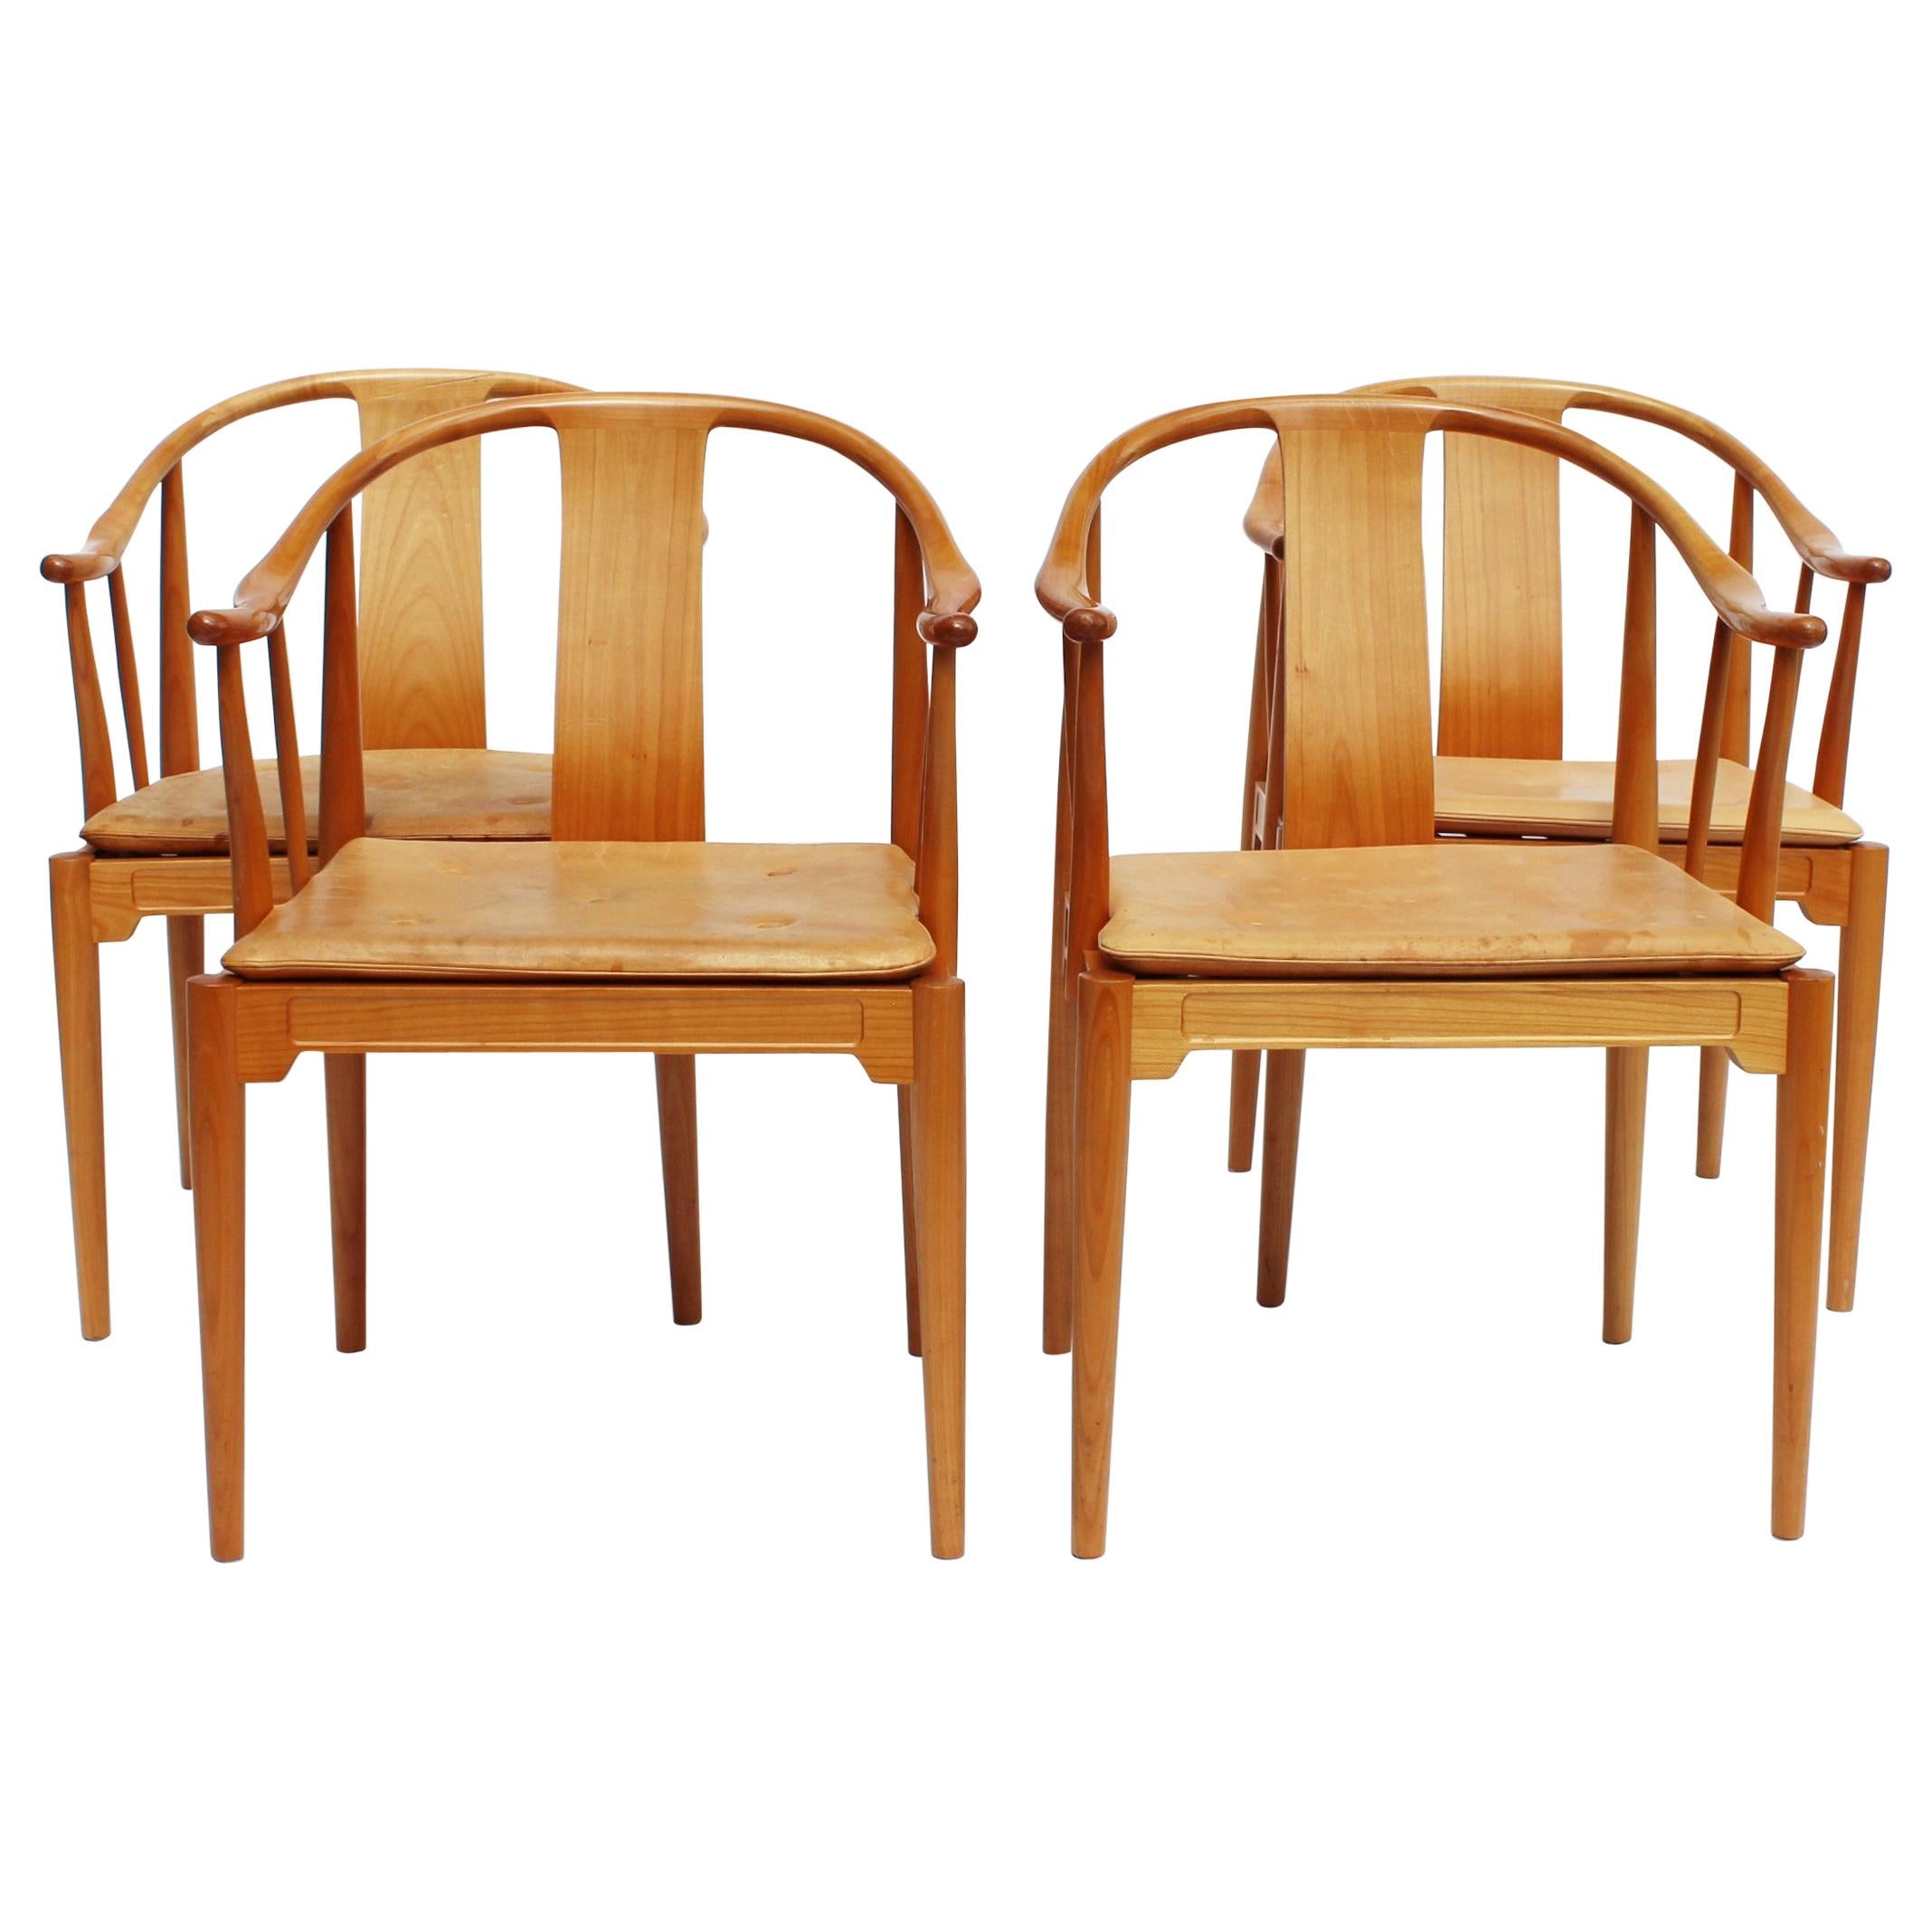 Set of Four China Chairs, Model 4283, by Hans J. Wegner and Fritz Hansen